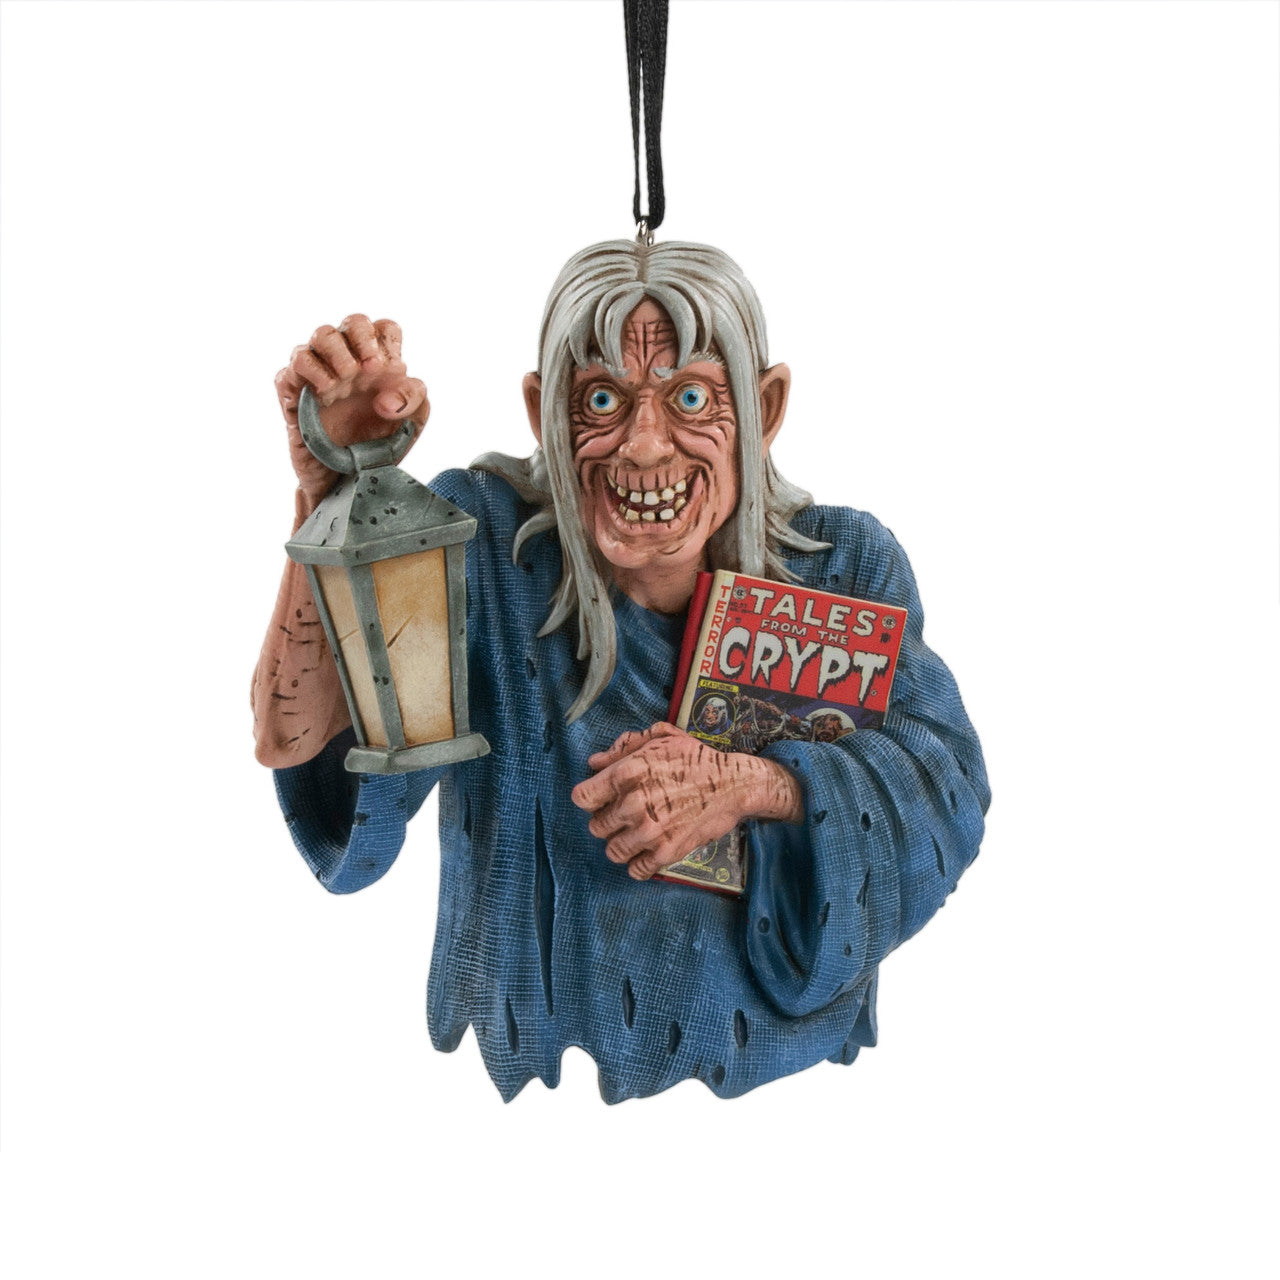 EC Comics "Tales from the Crypt" Masterpiece Ornament Set